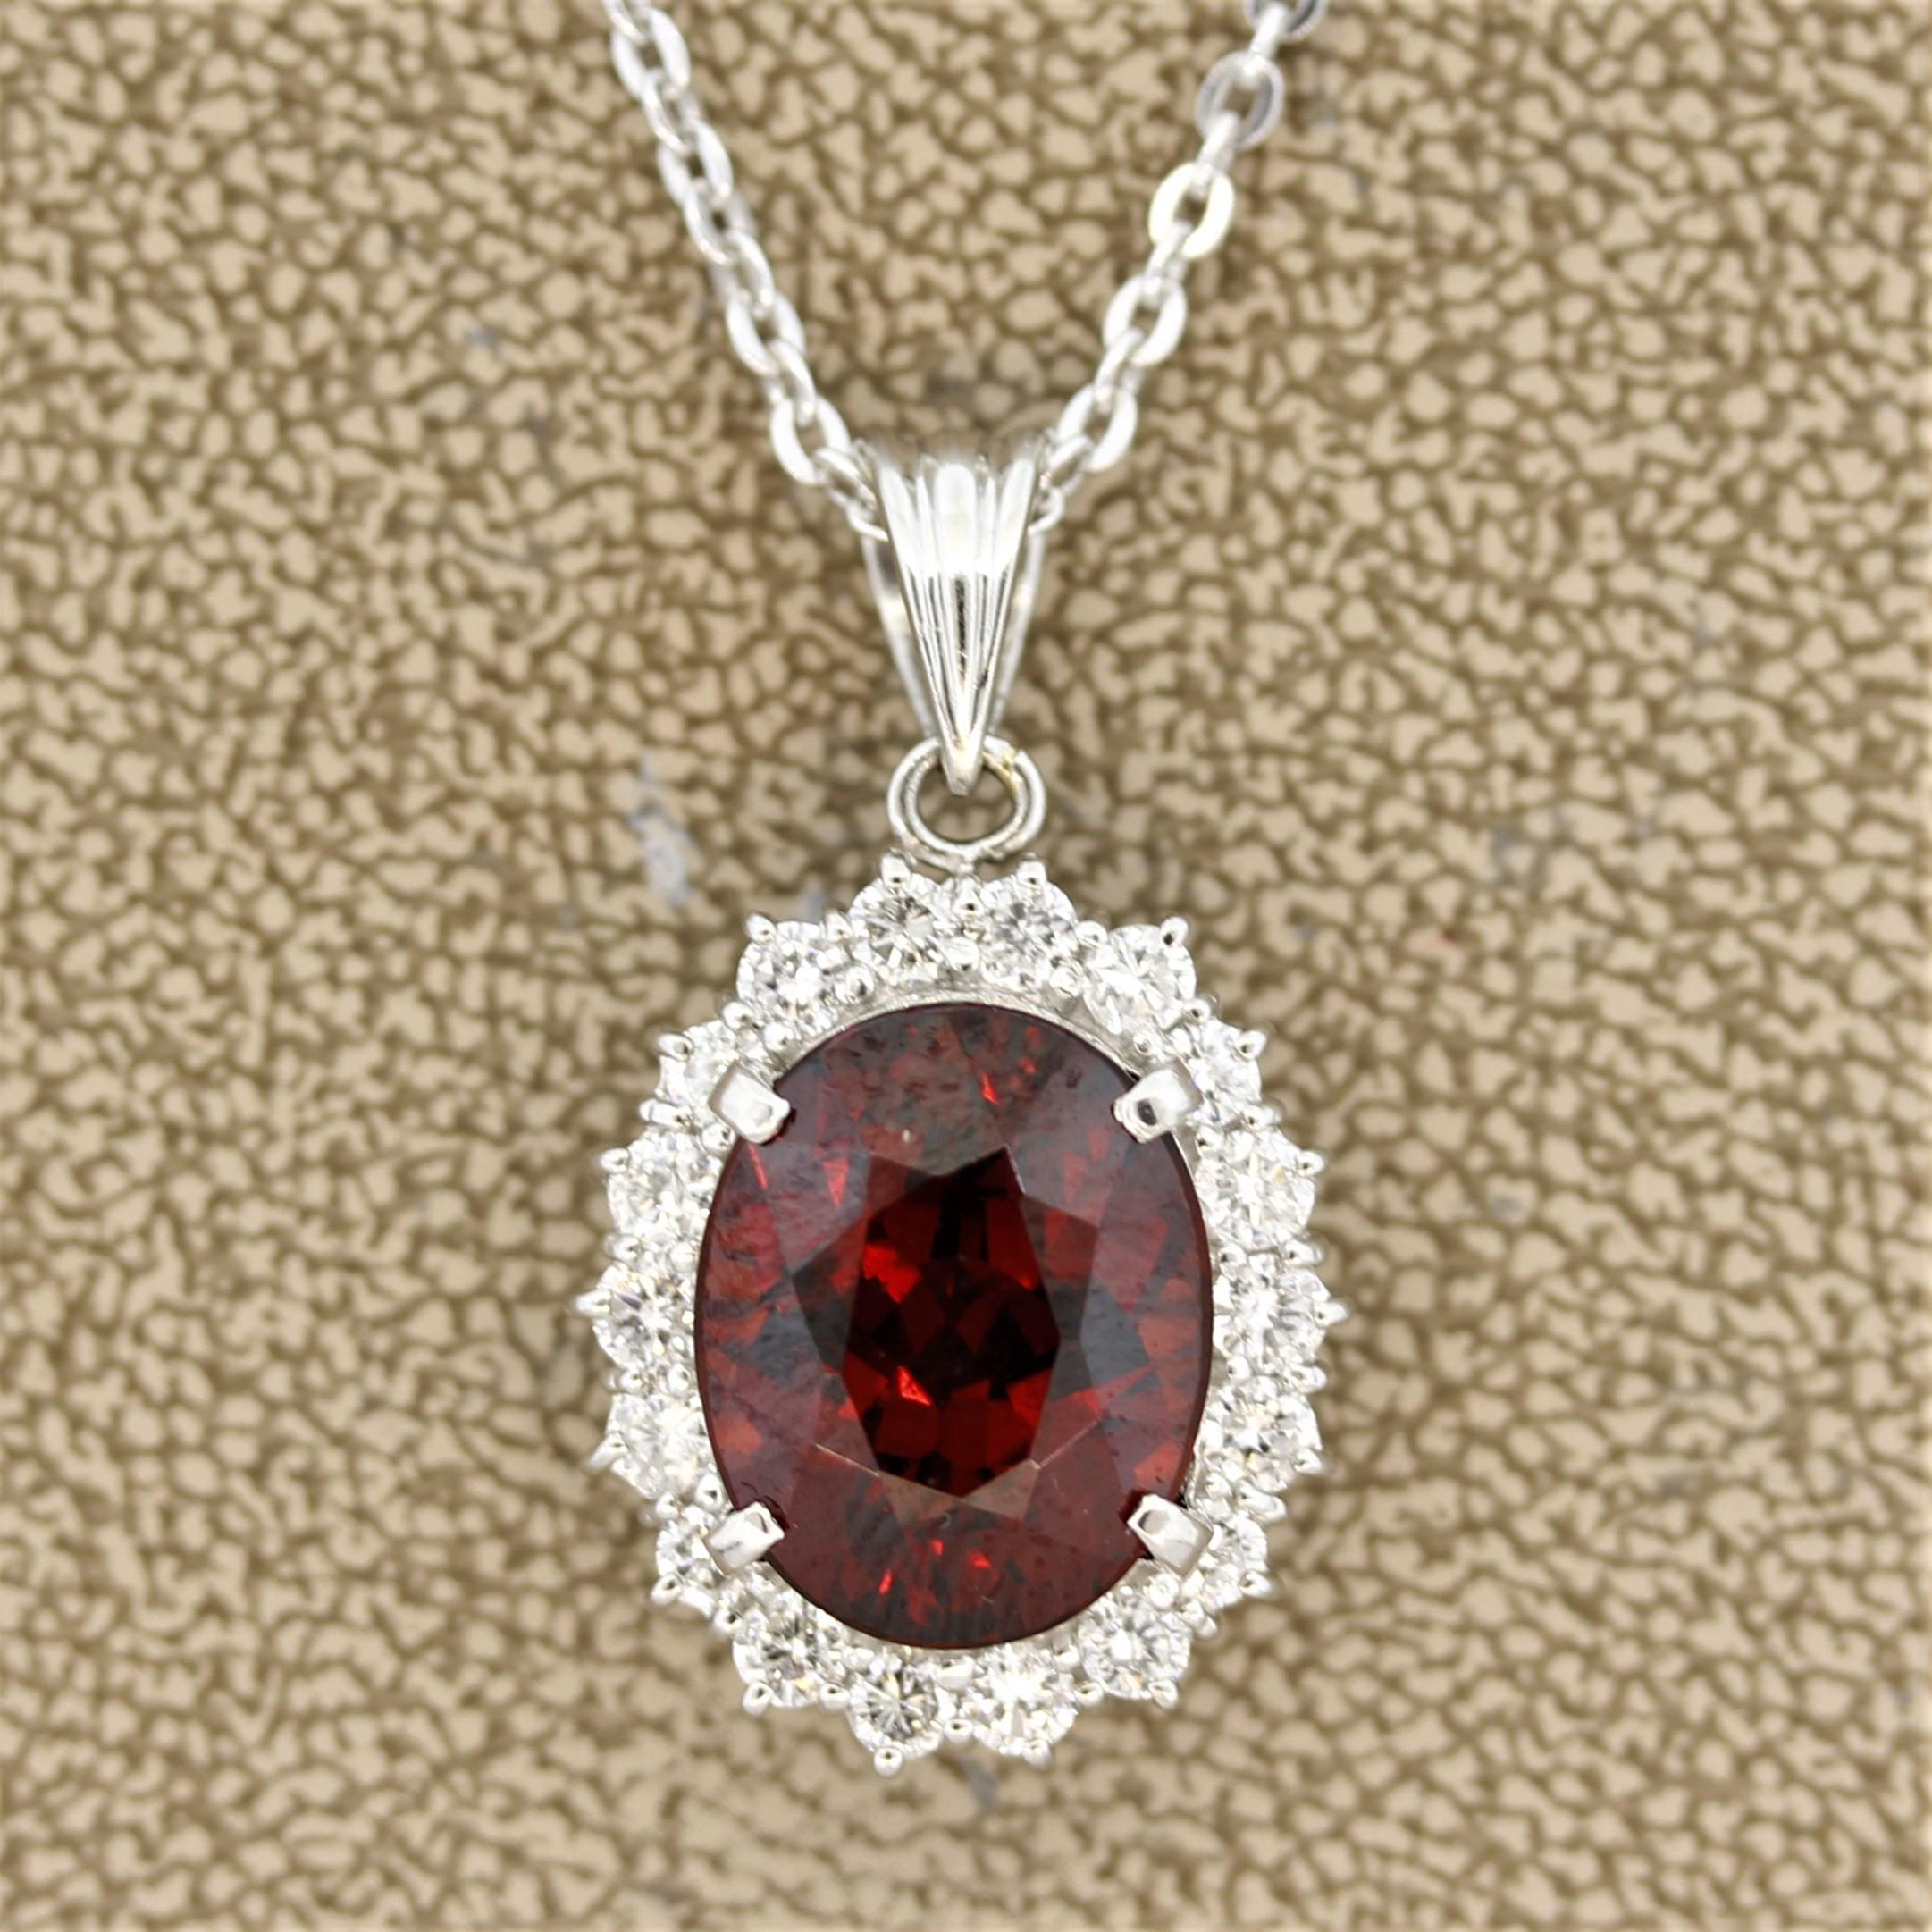 A lovely pendant featuring a fine orange-red spessartine garnet. It has an intense color with excellent brilliance and weighs 9.46 carats. Accenting the garnet is a halo of round brilliant cut diamonds weighing 0.96 carats. Hand-fabricated in